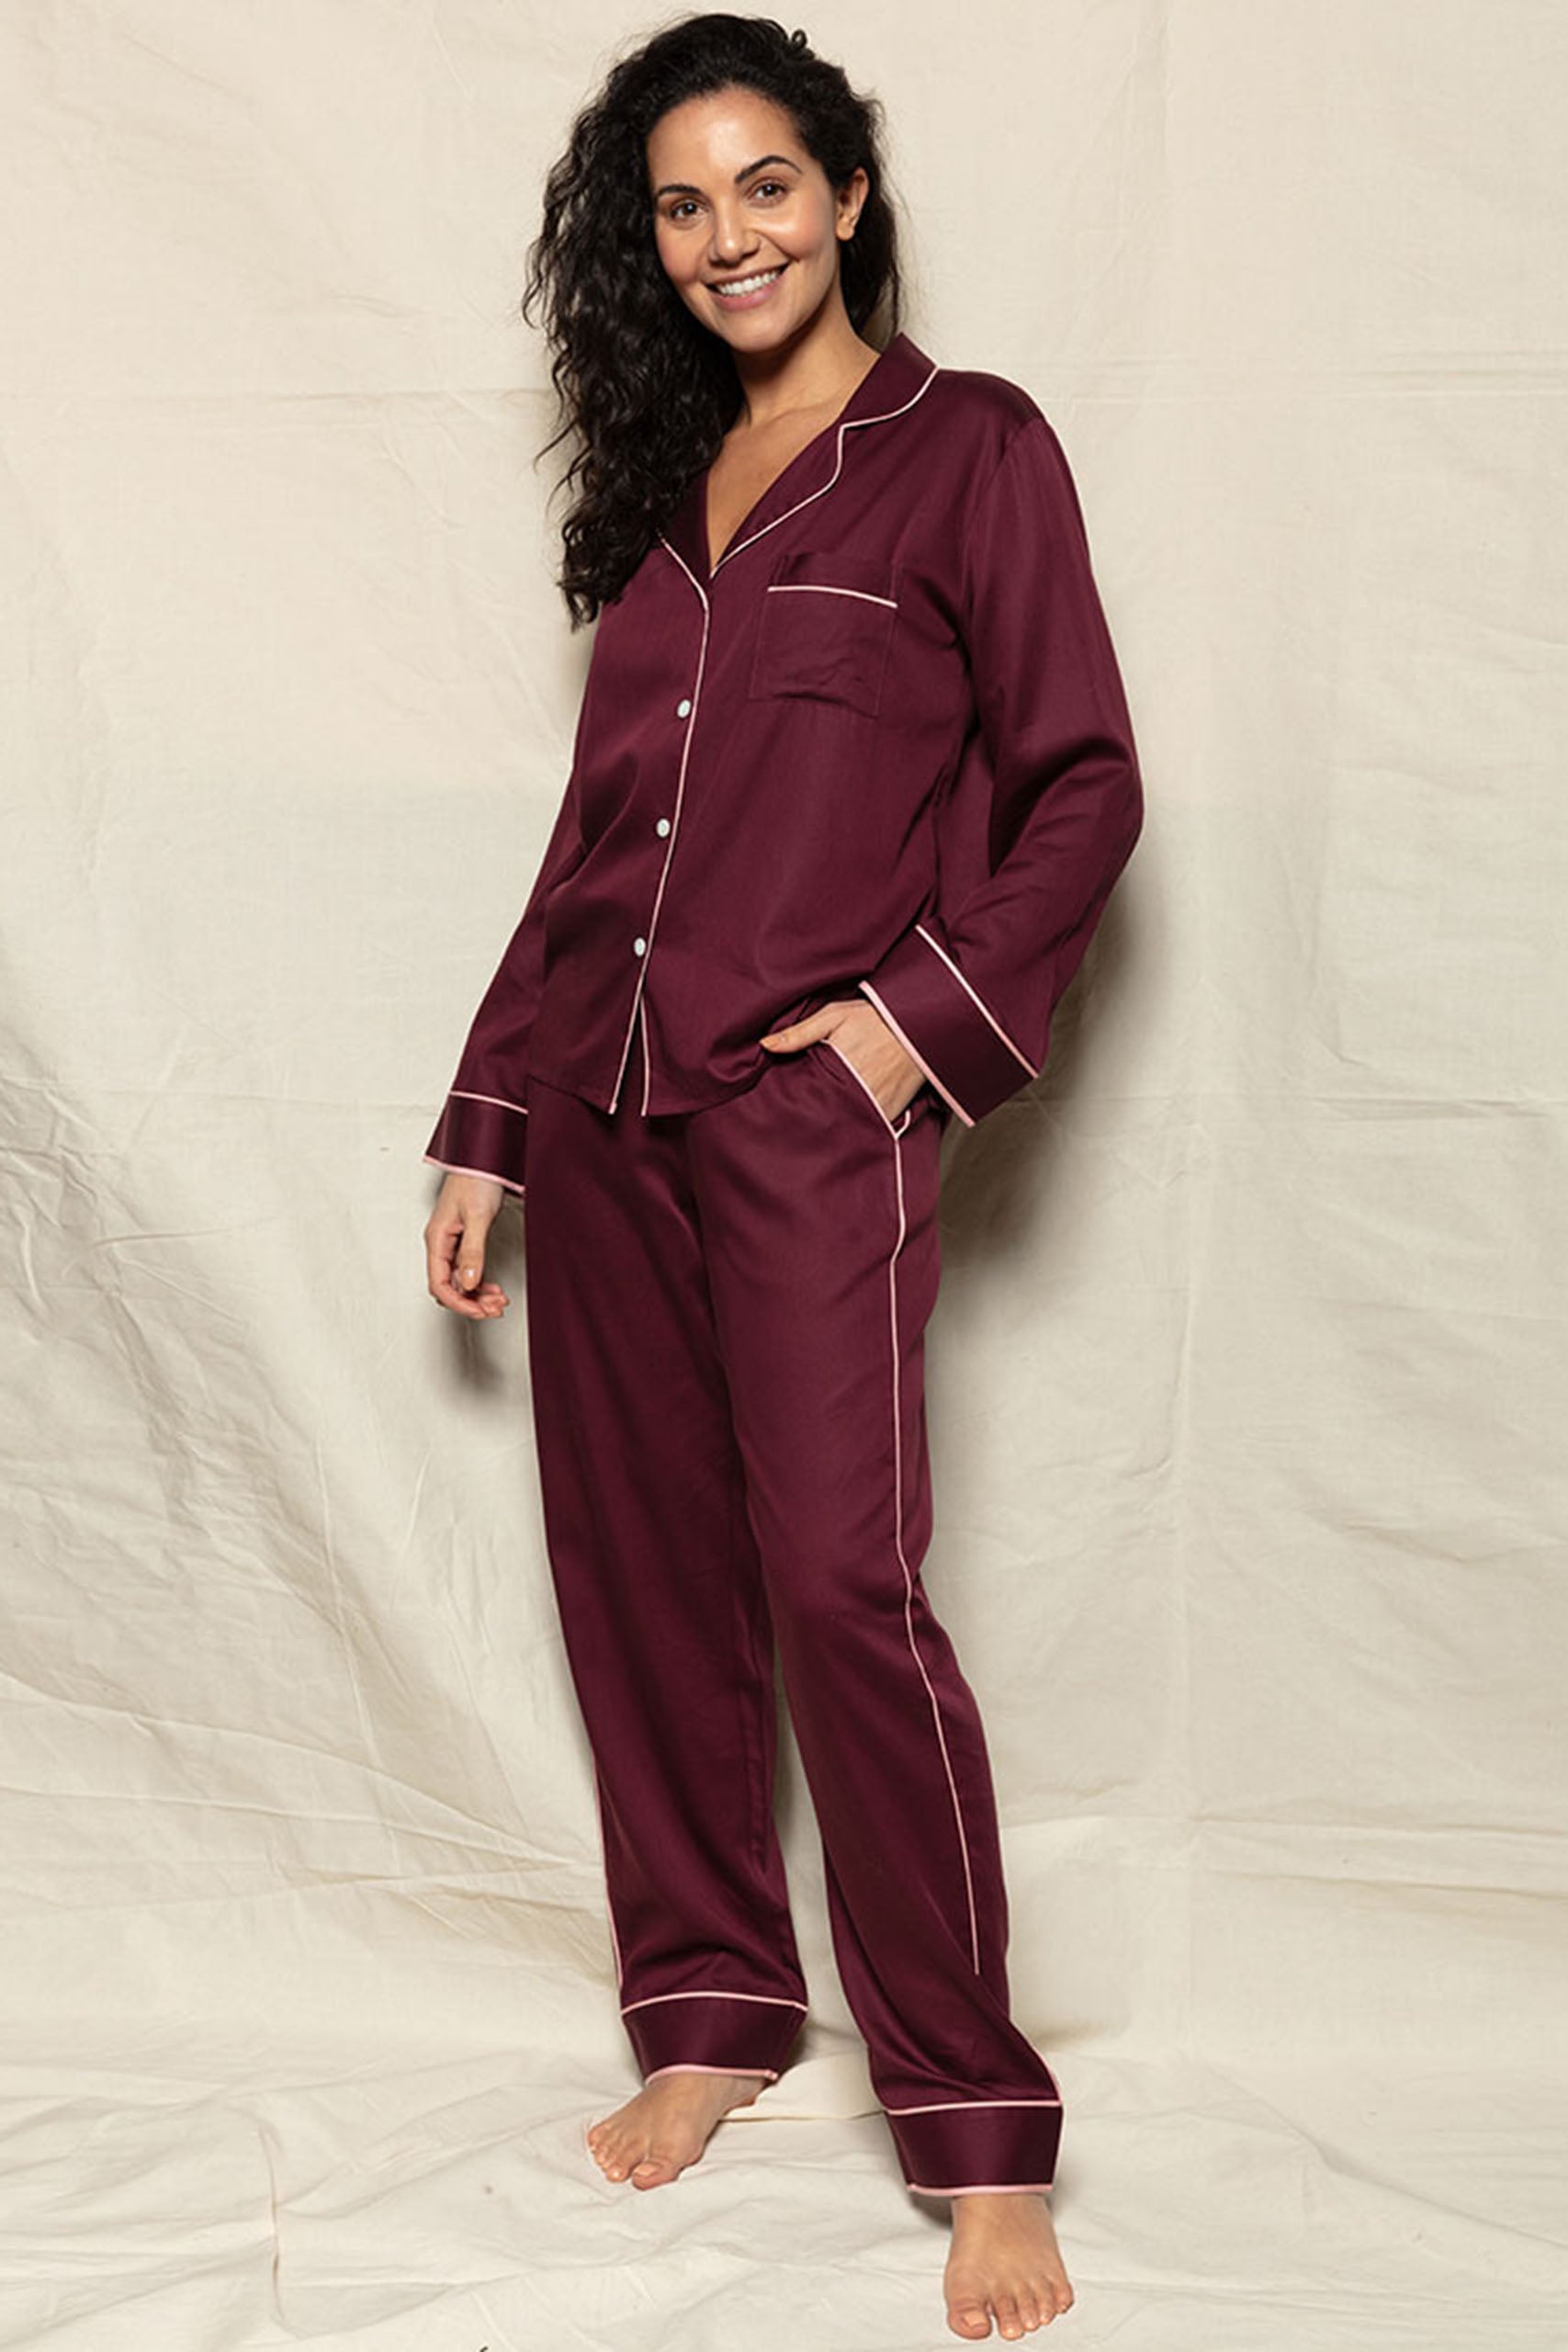 Piccadilly Burgundy Pyjama Set - Fable and Eve